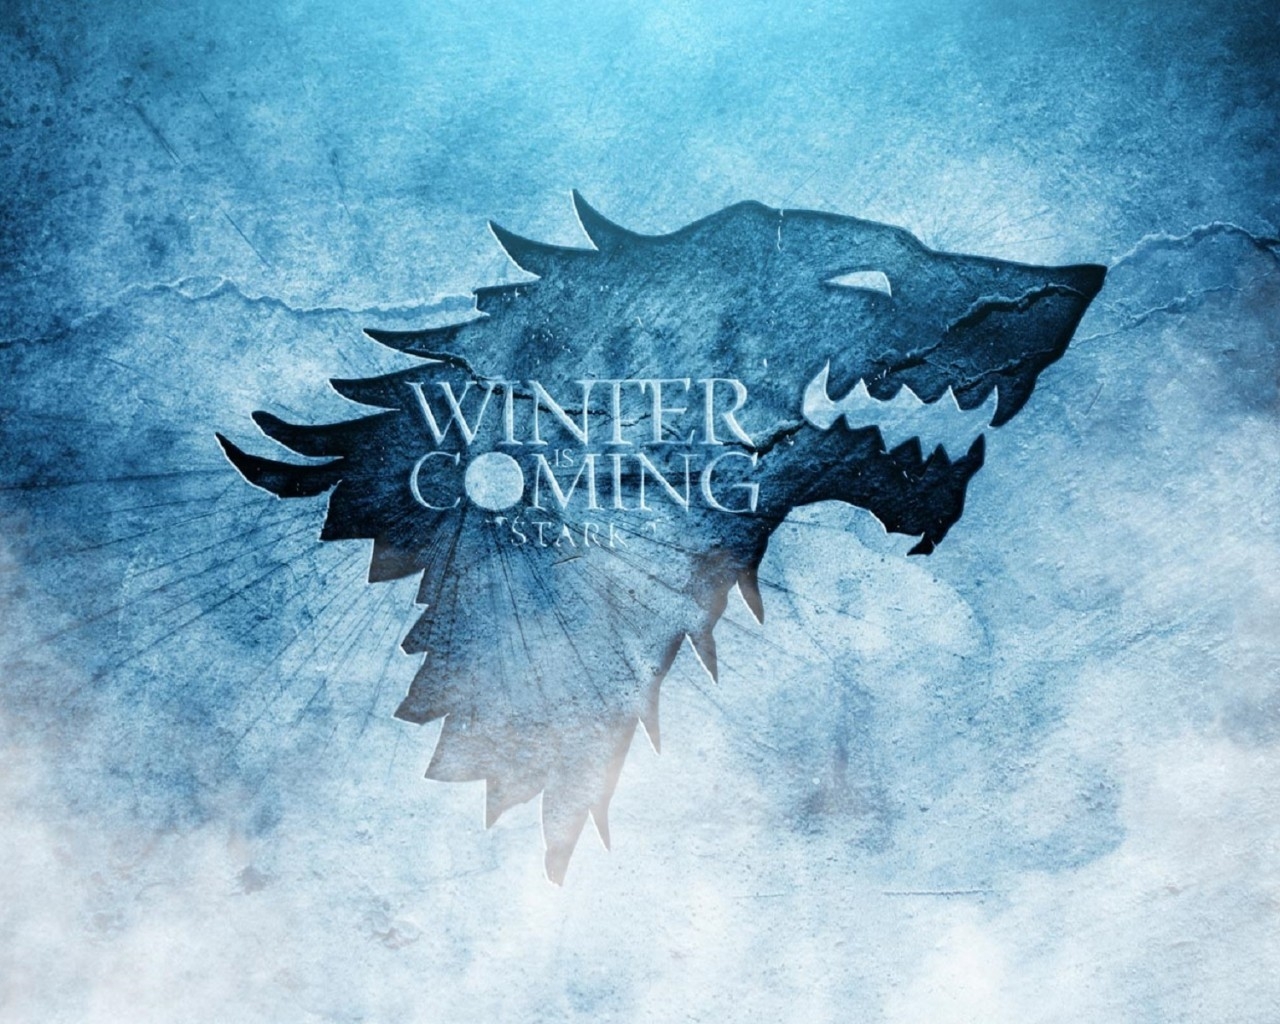 Game of Thrones the Song of Ice and Fire for 1280 x 1024 resolution